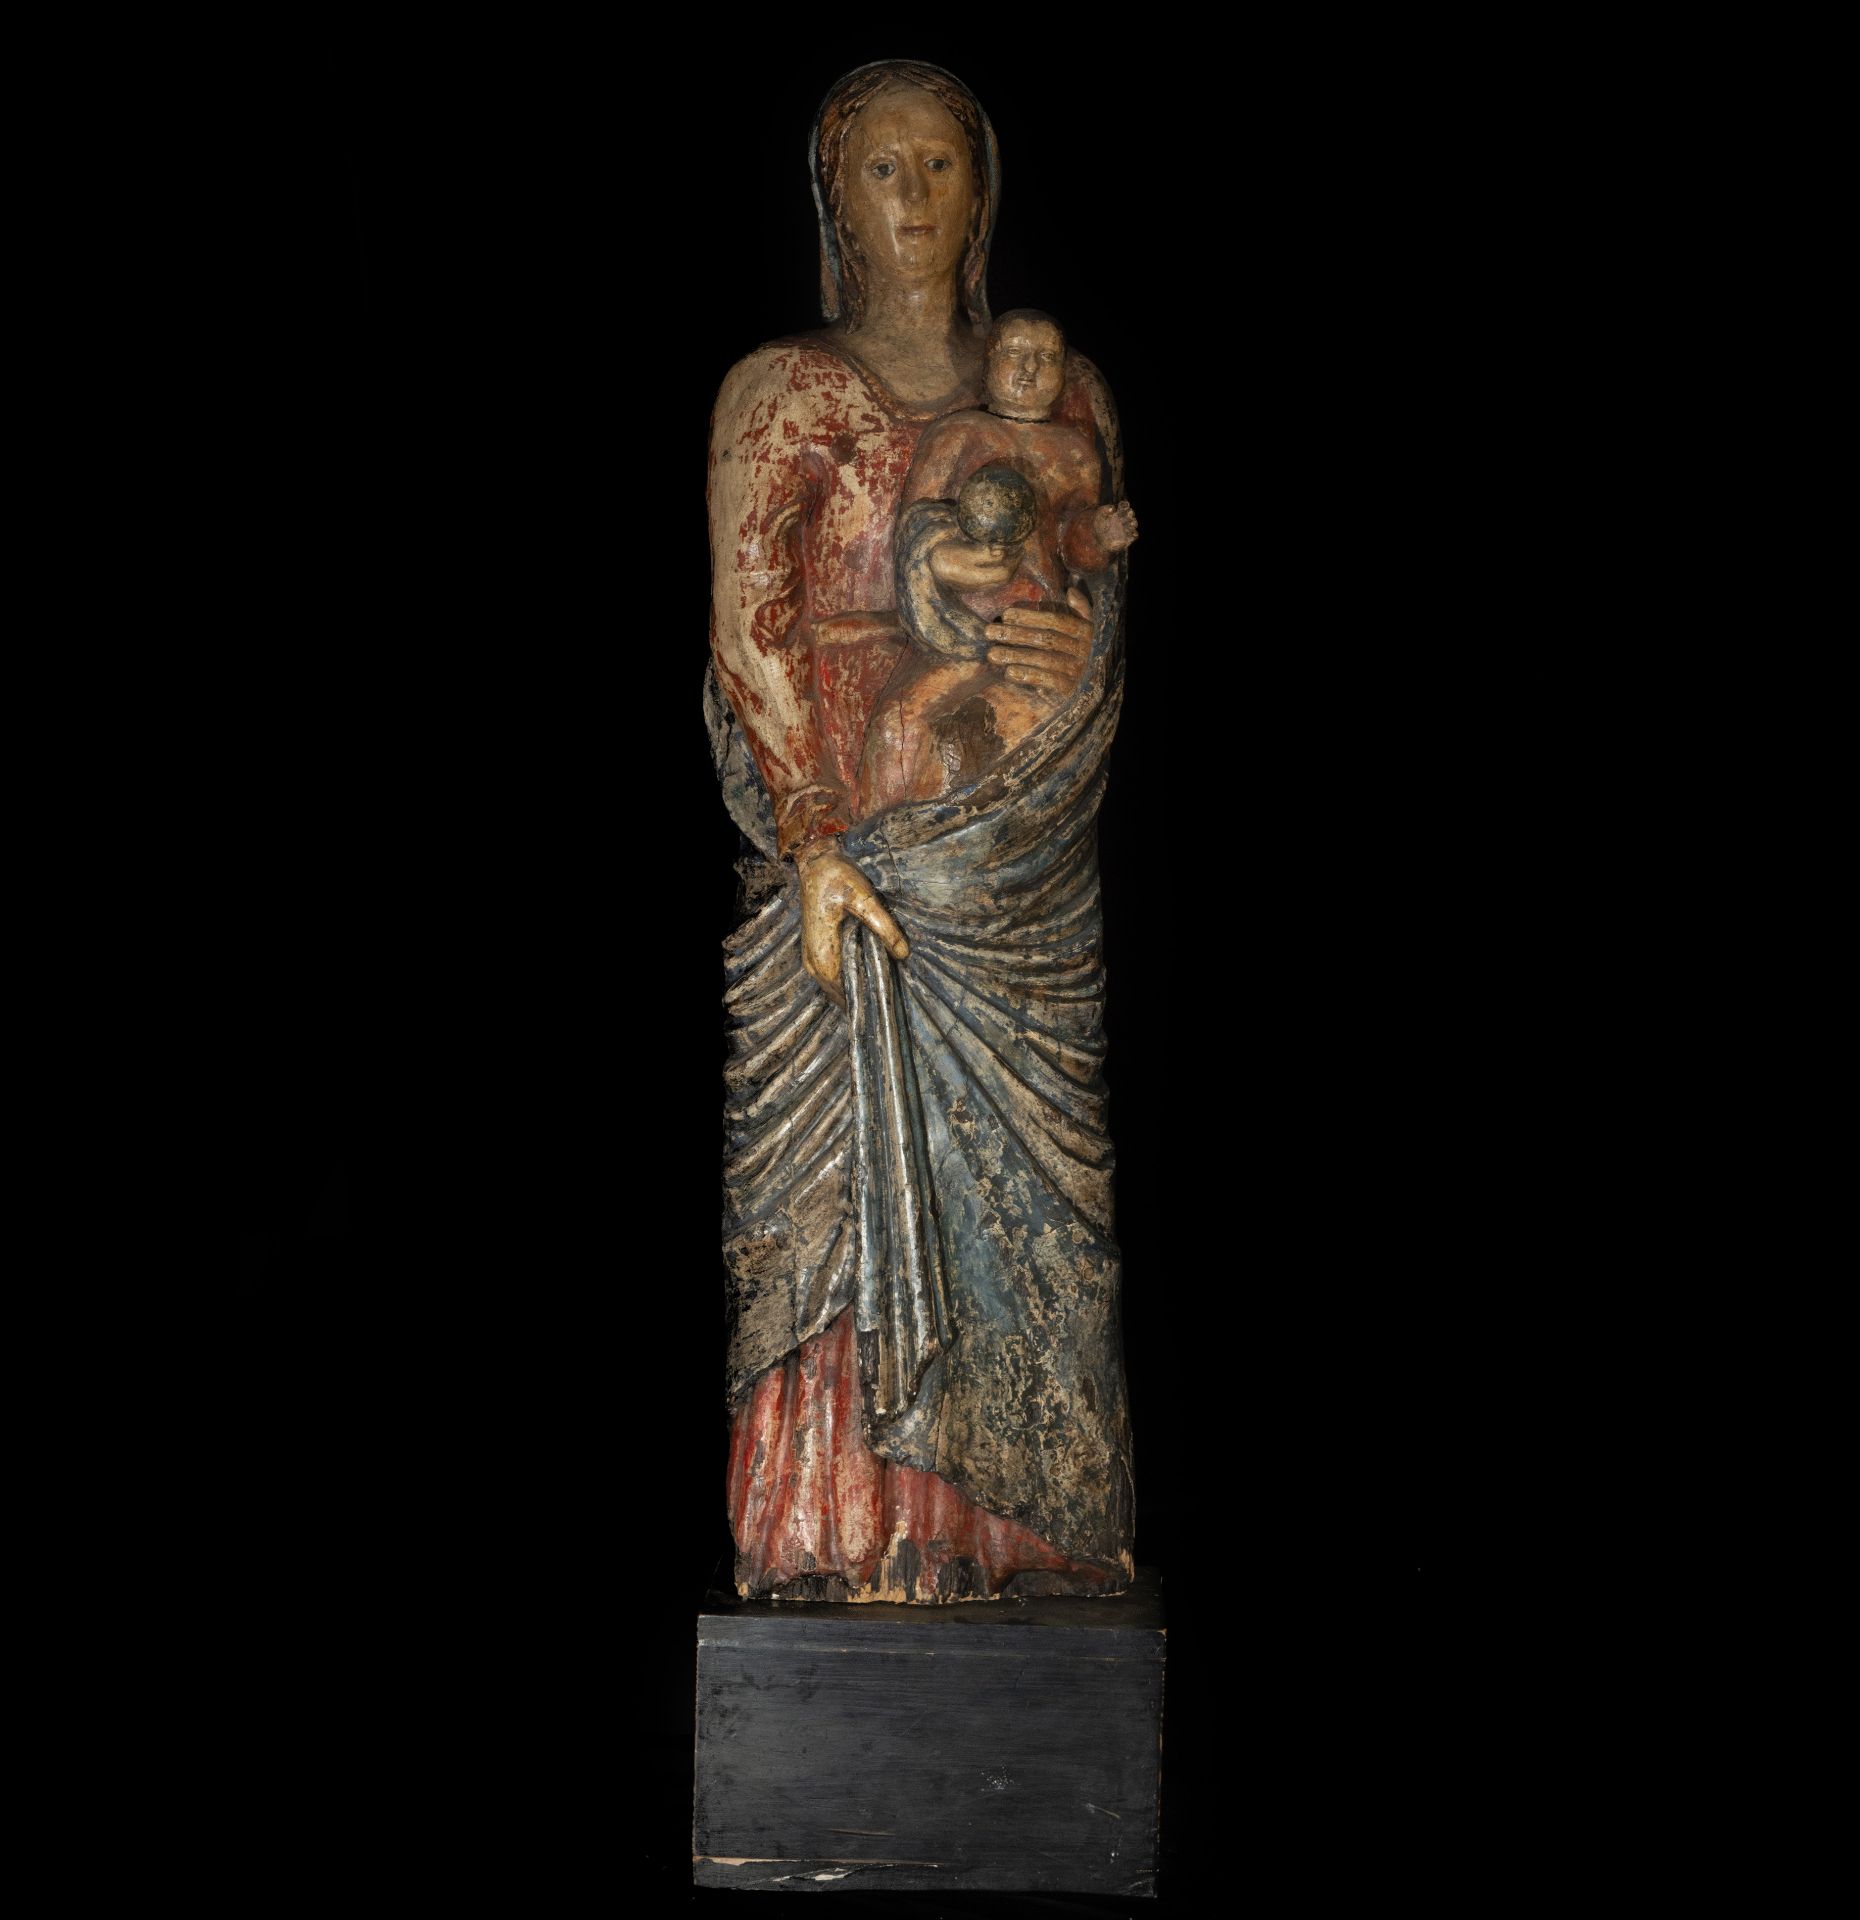 Magnificent 13th century Late Romanesque Virgin from Northern Italy, possibly Lombardy